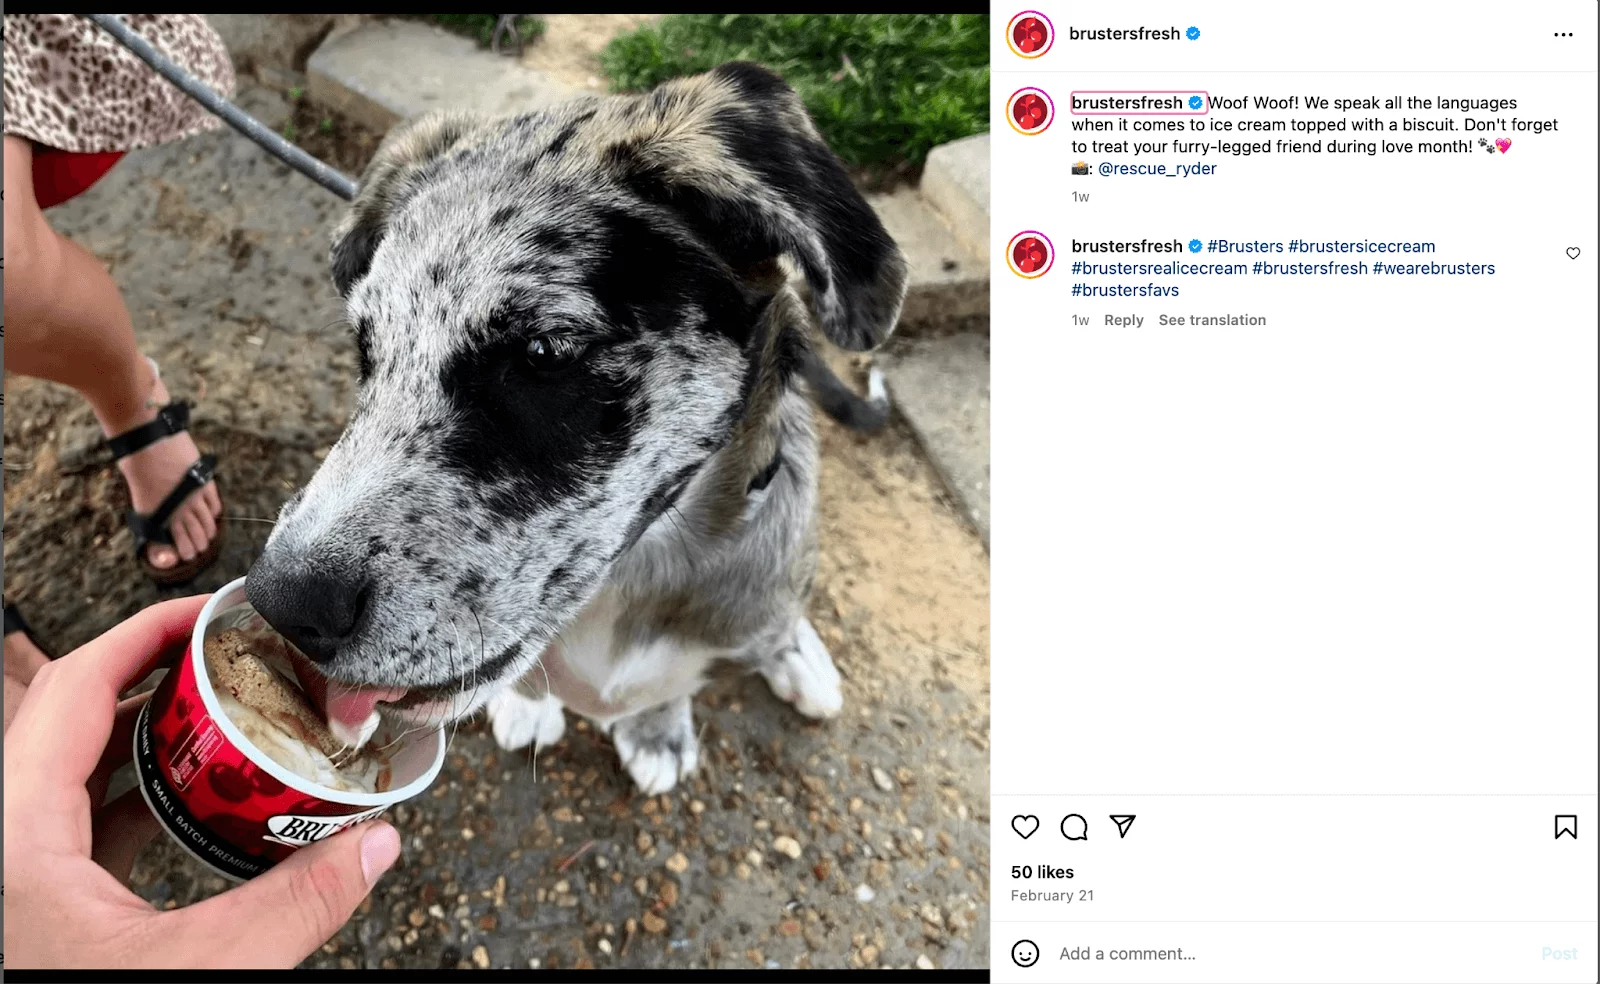 Bruster's Fresh highlights a dog enjoying ice cream topped with a biscuit in an engaging Instagram post.